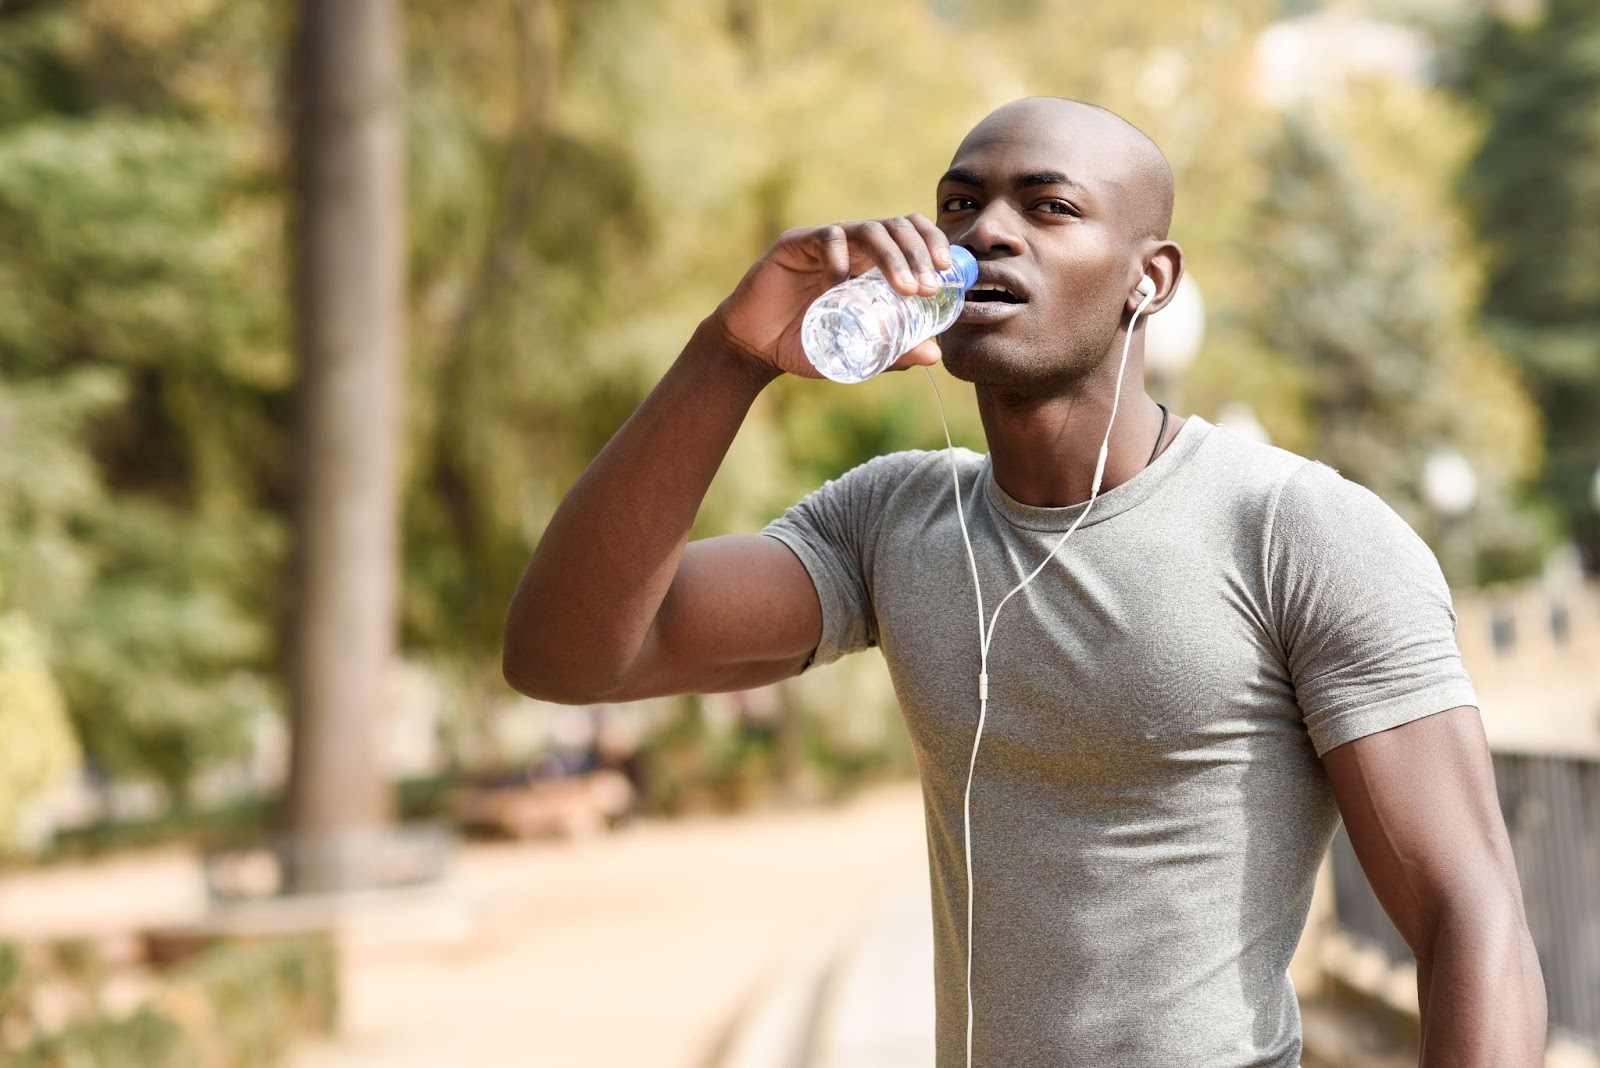 Fit young man drinking water before going for a run